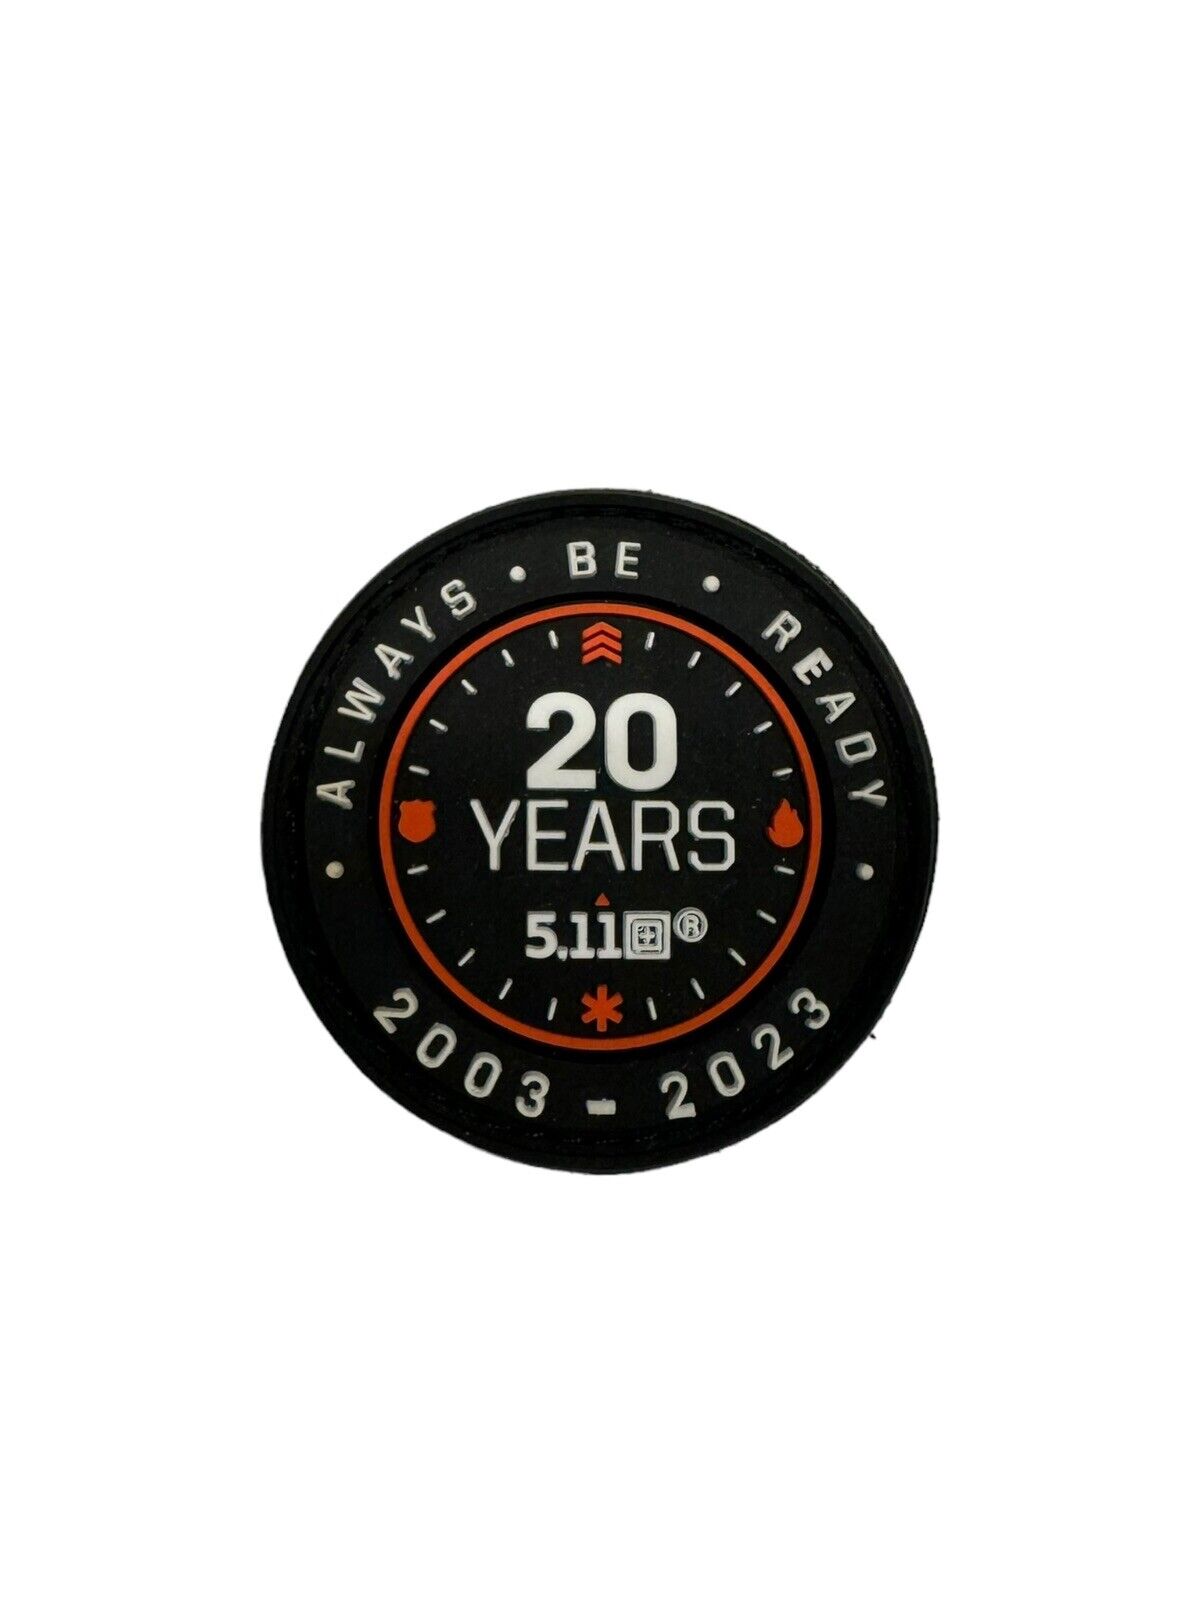 Rare 20 year anniversary 5.11 tactical patch